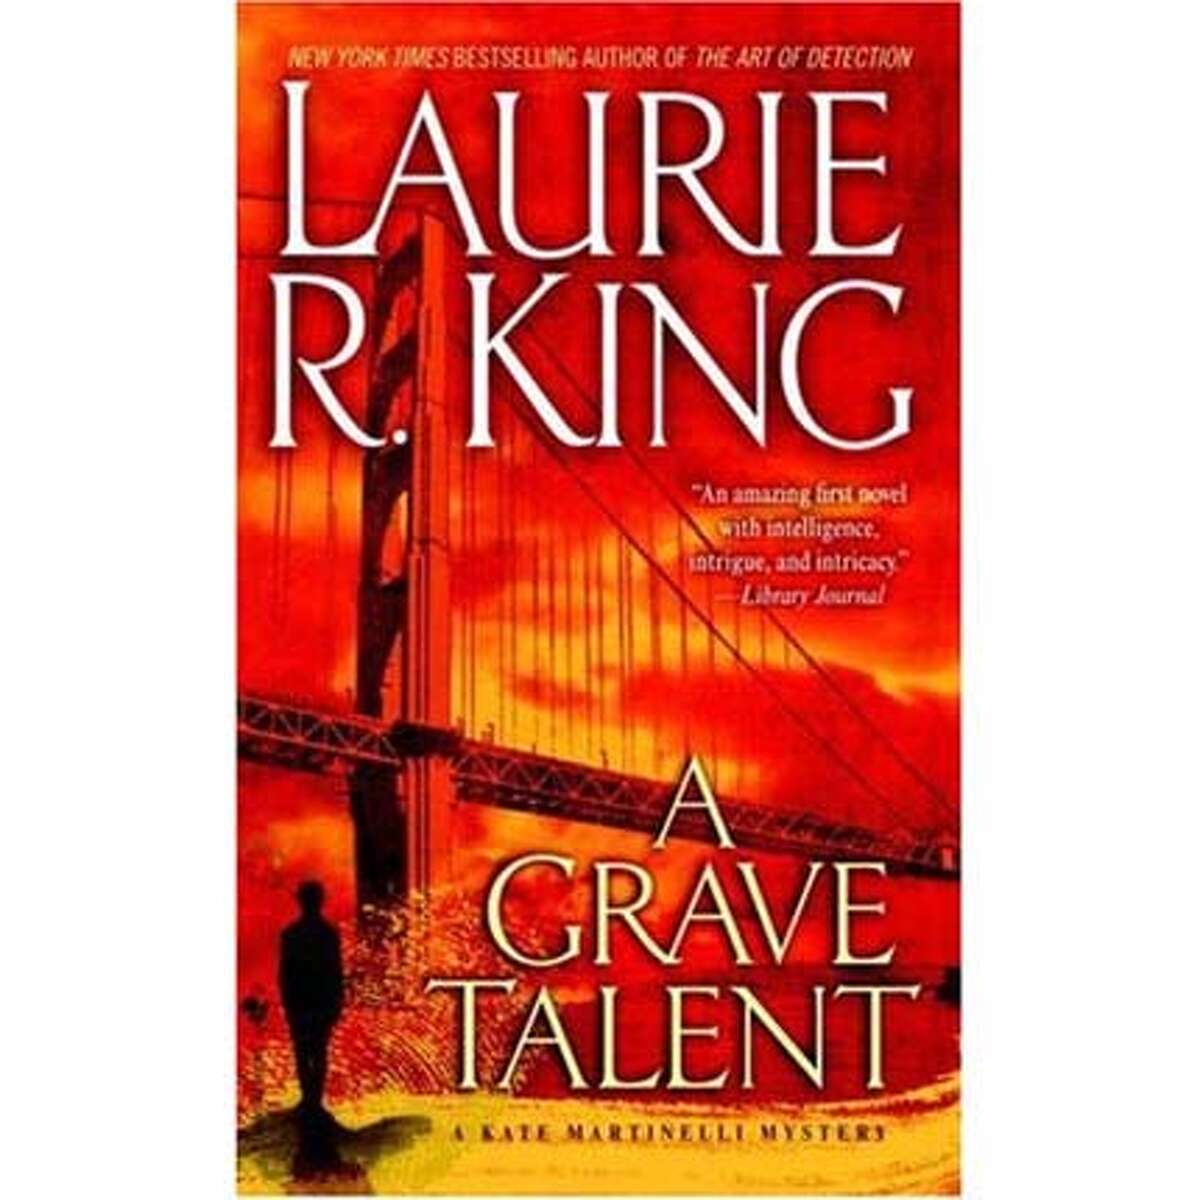 "A Grave Talent" by Laurie R. King